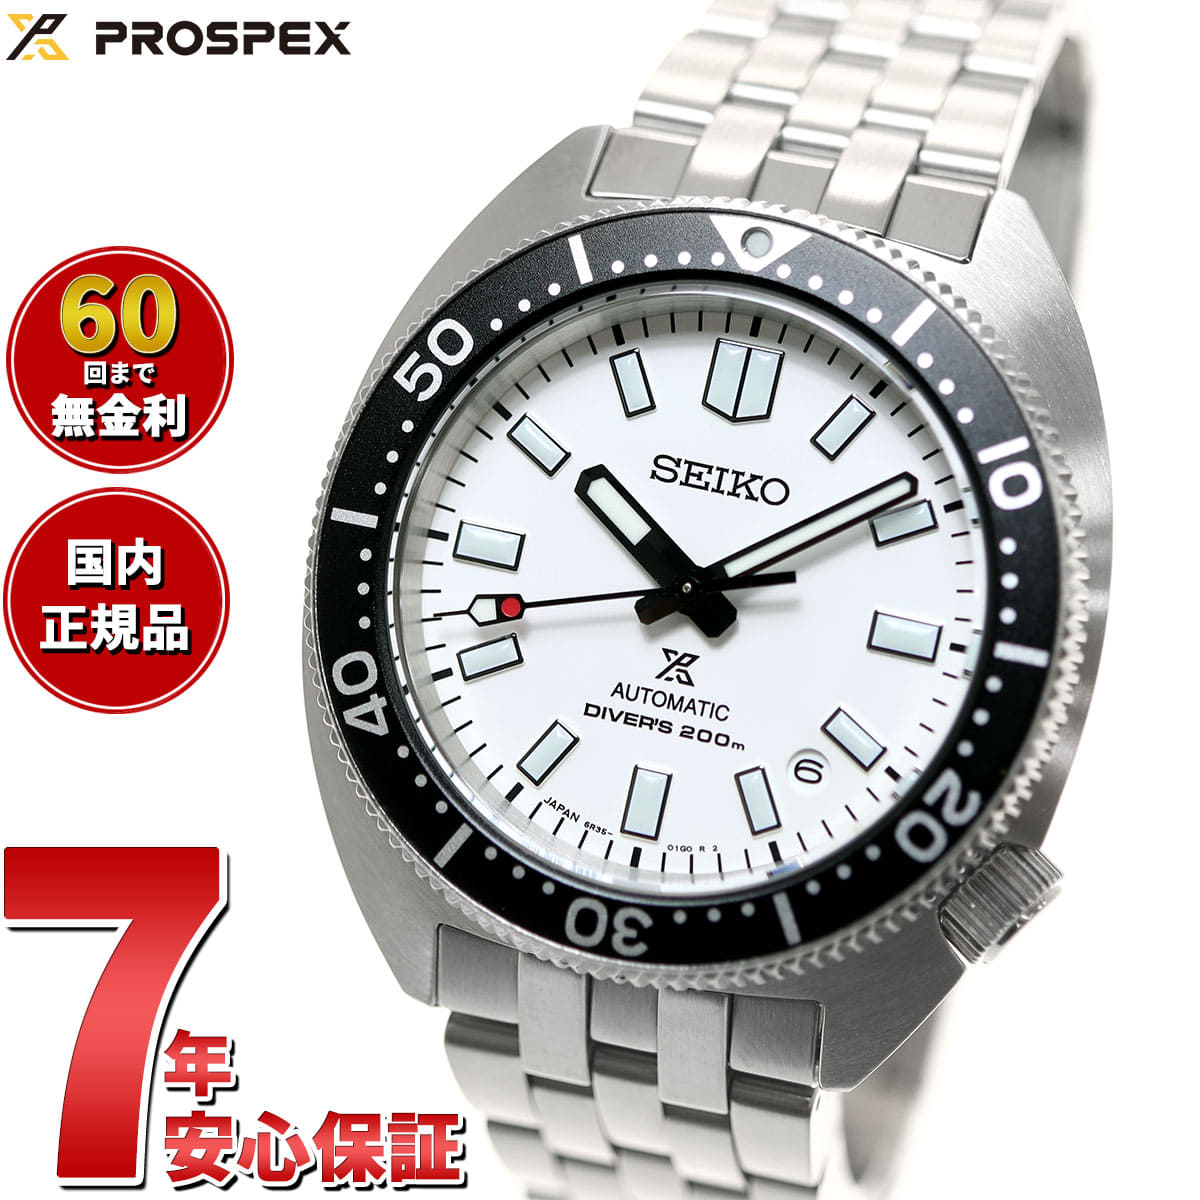 New]loan Model mens SBDC171 2022 latest for exclusive use of the SEIKO  Pross pecks SEIKO PROSPEX 1st divers Mechanical Automatic winding core shop  - BE FORWARD Store